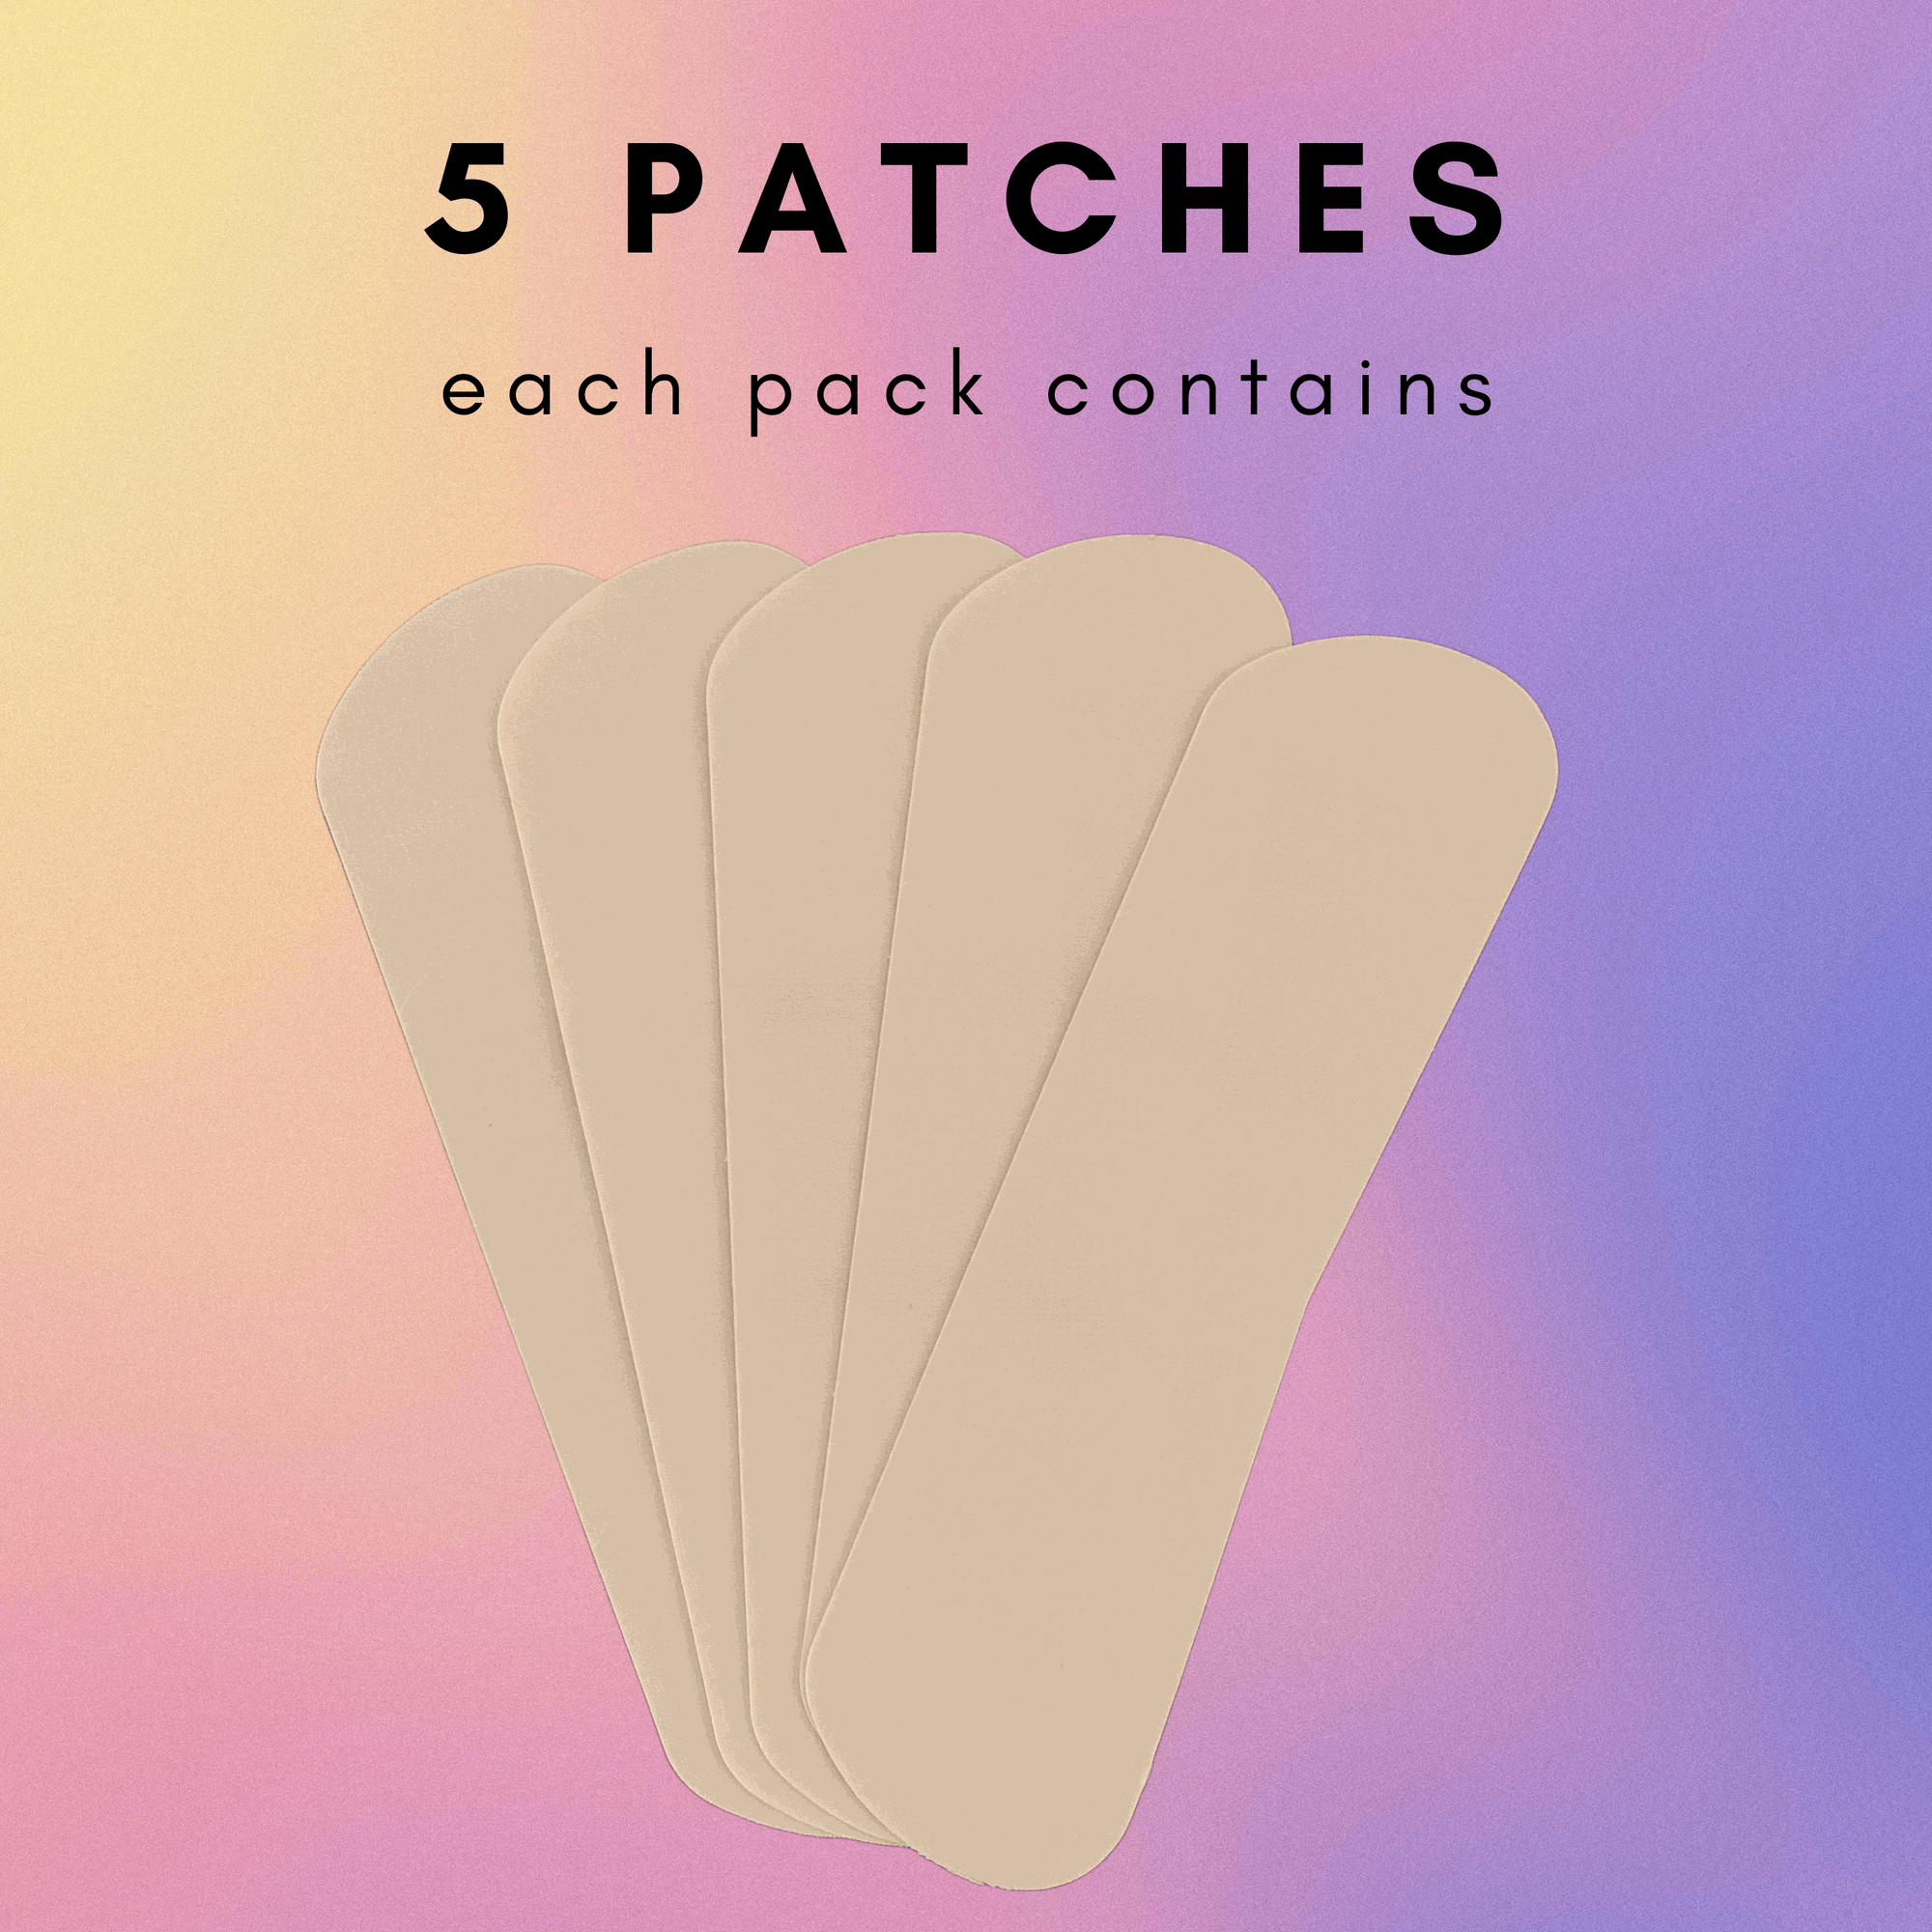 Contains 5 Patches